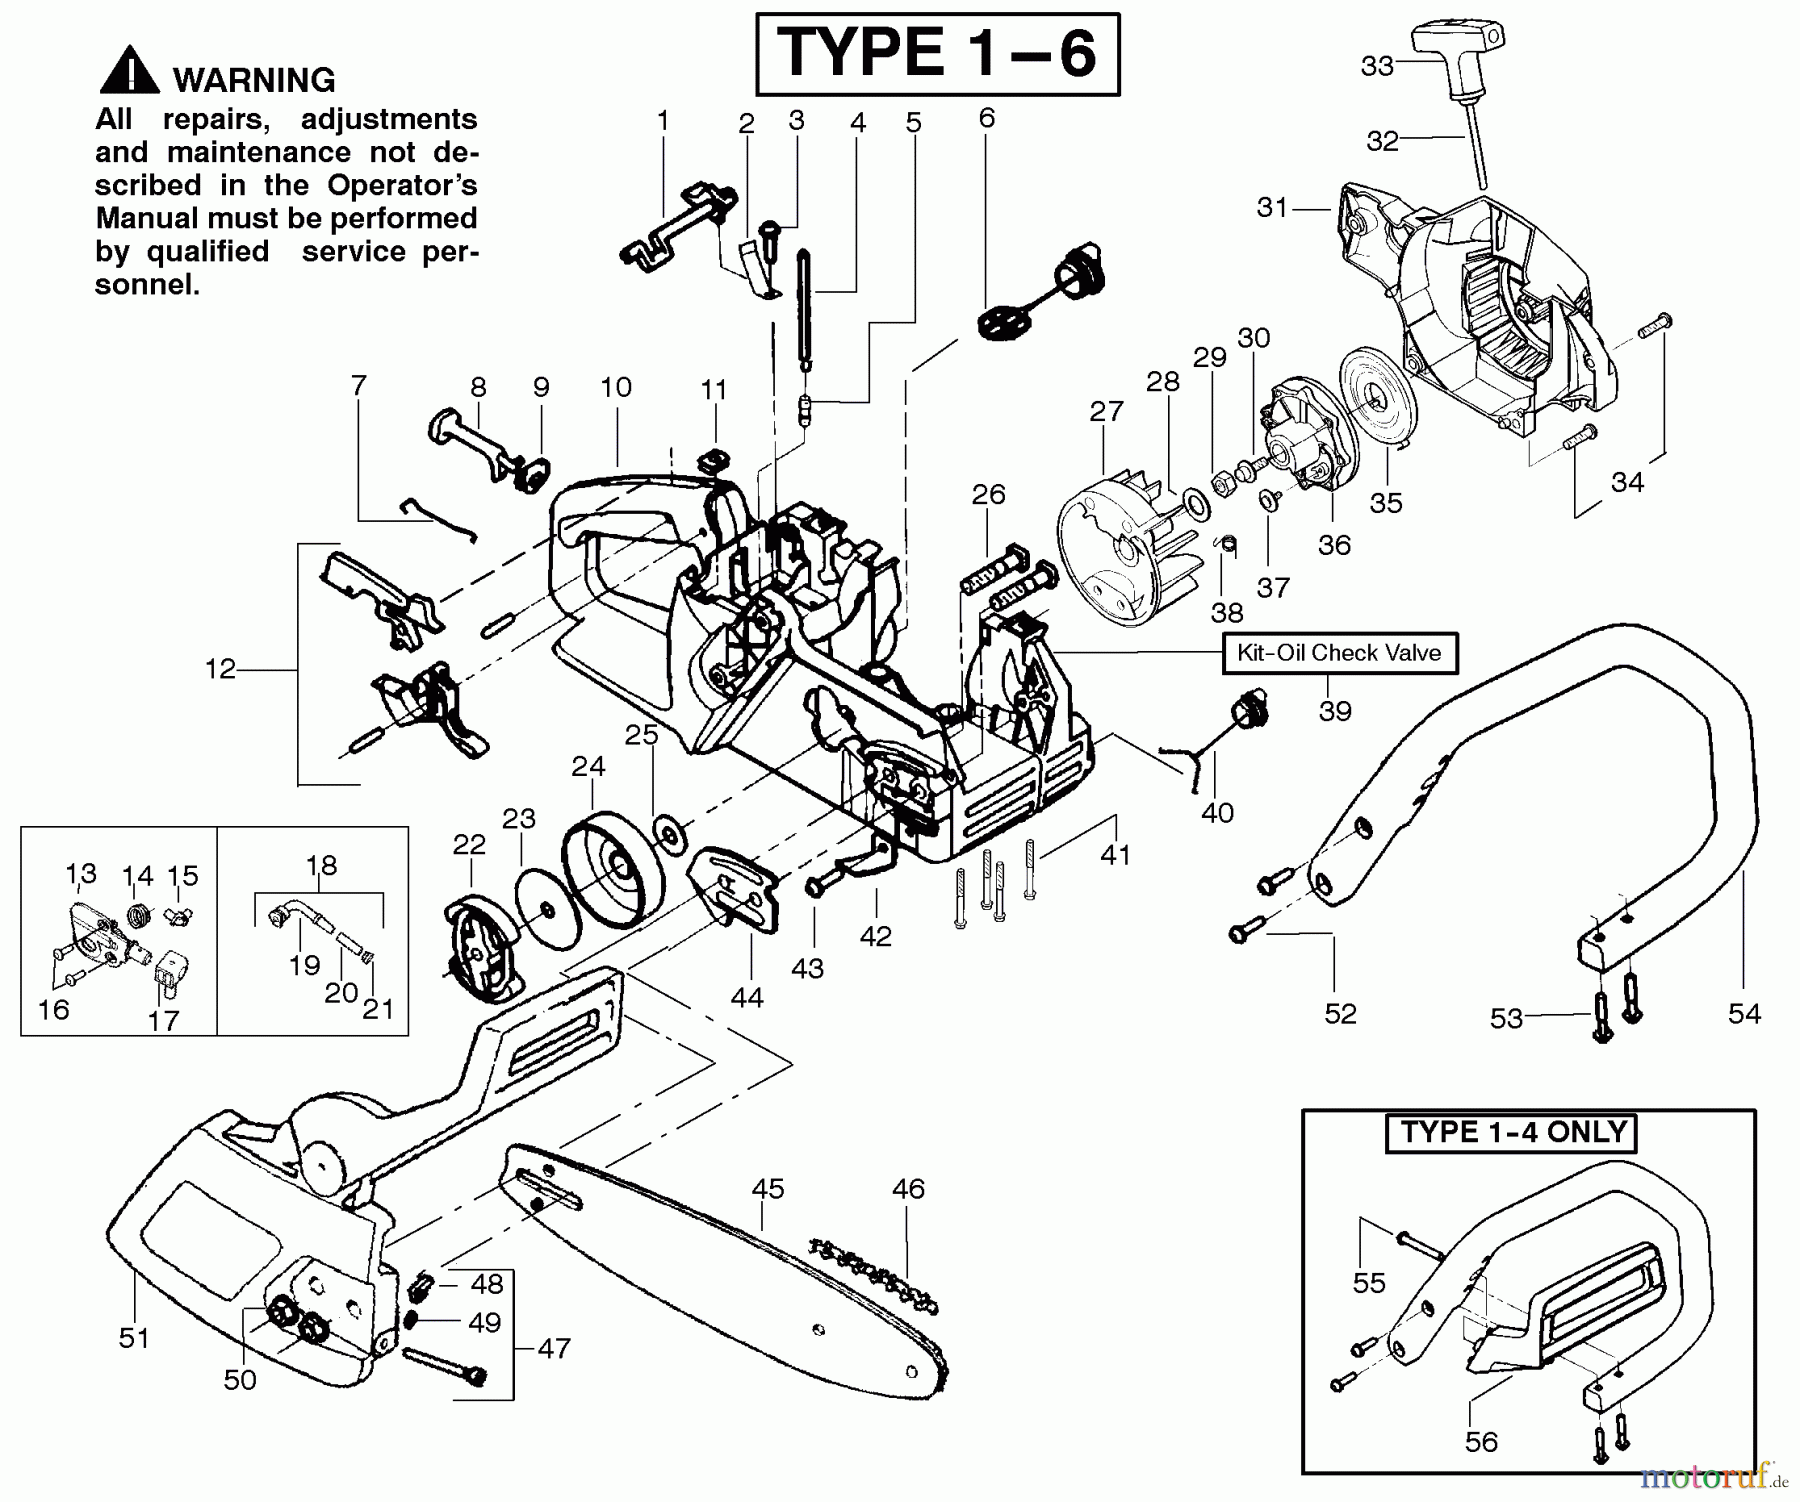  Poulan / Weed Eater Motorsägen 2375 (Type 5) - Poulan Wildthing Chainsaw Handle, Chassis & Bar Assembly Type 1-6